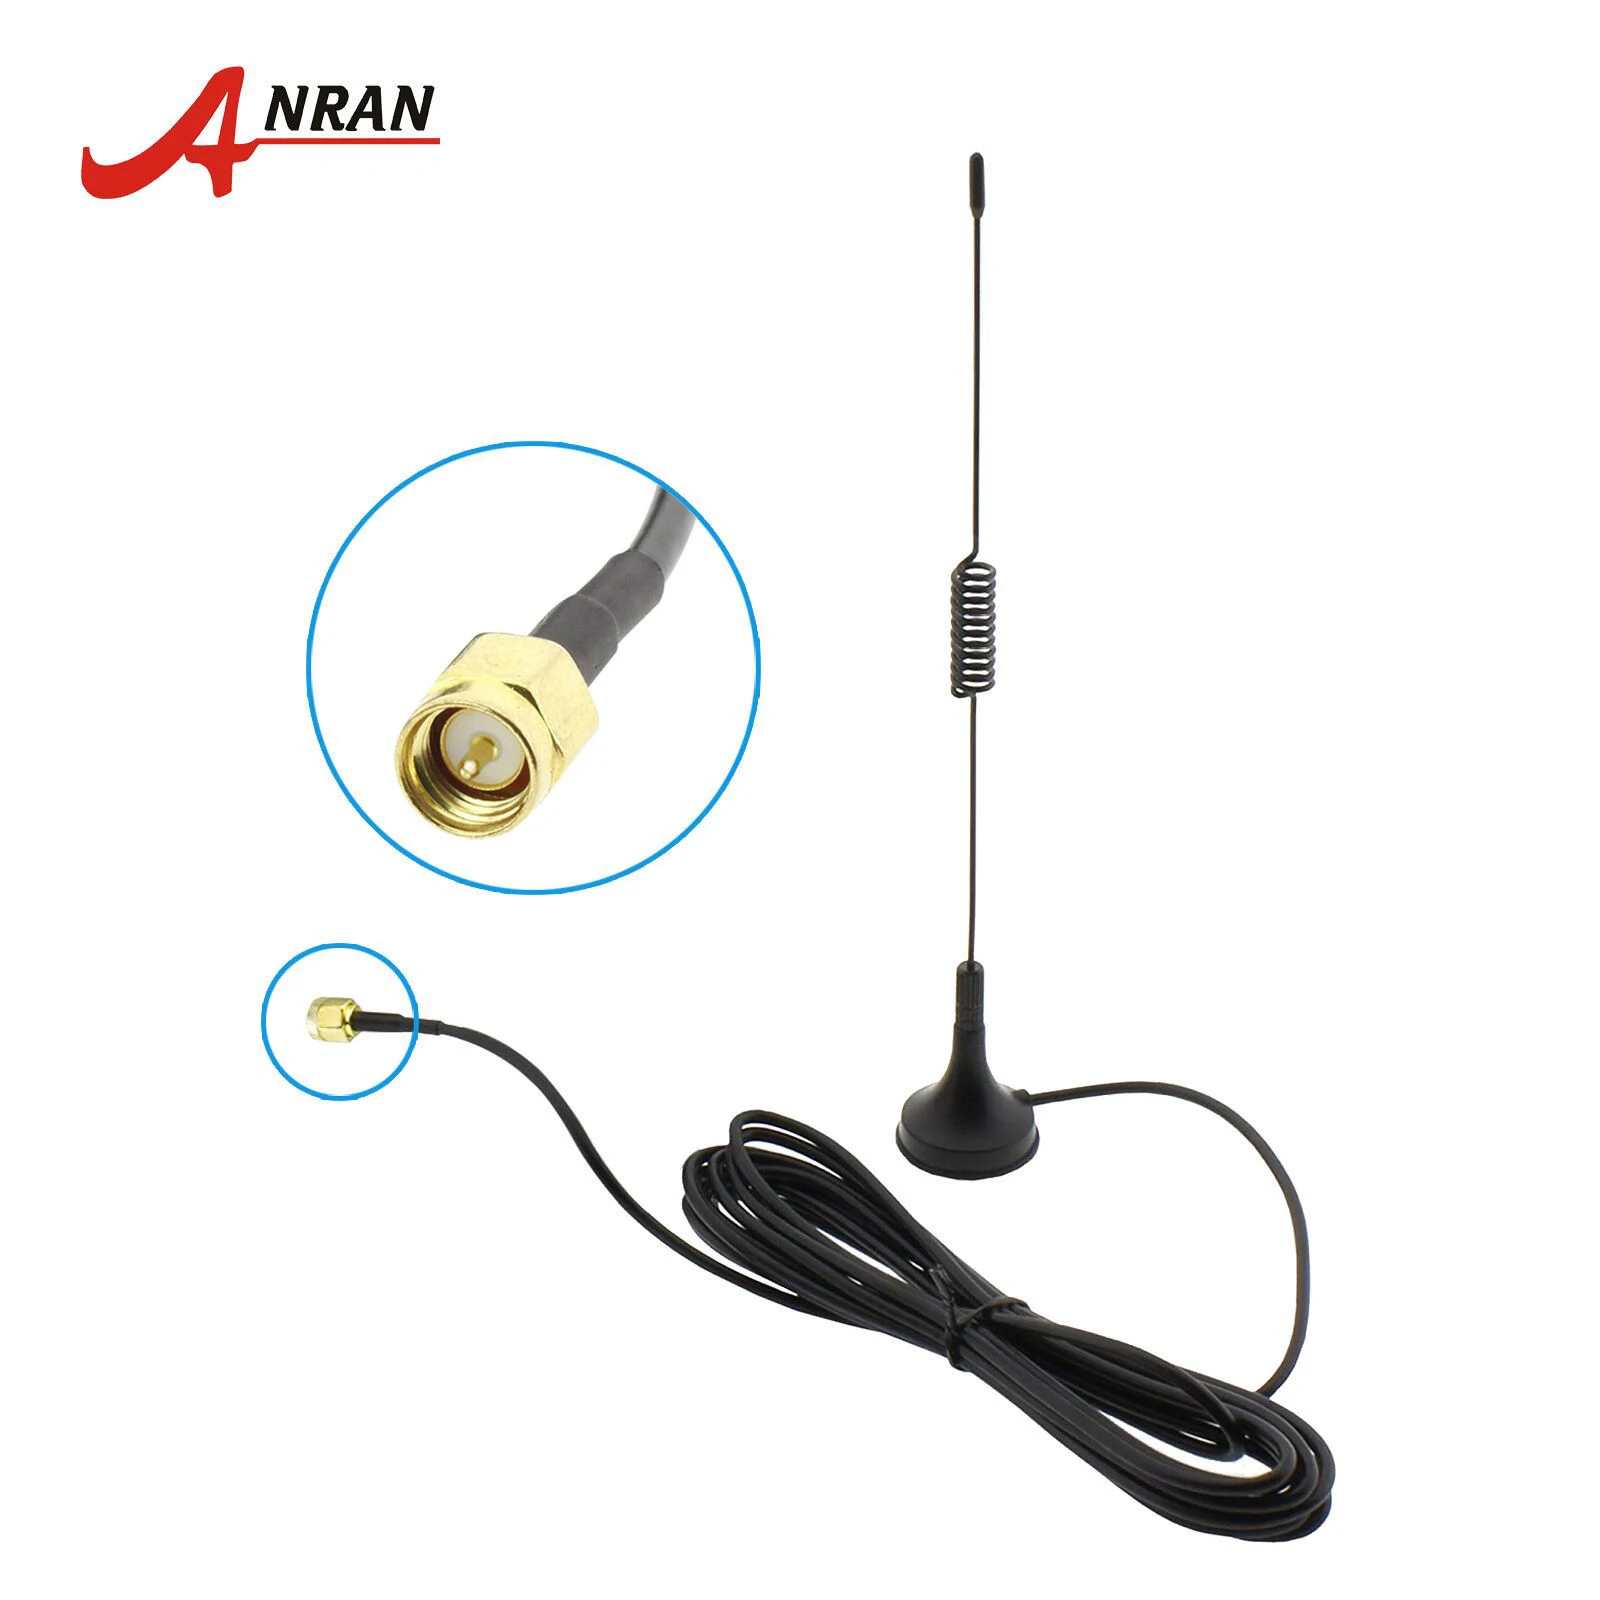 3M 10ft WiFi Antenna Extension Cable Male Connector for ANRAN Wireless Security Camera